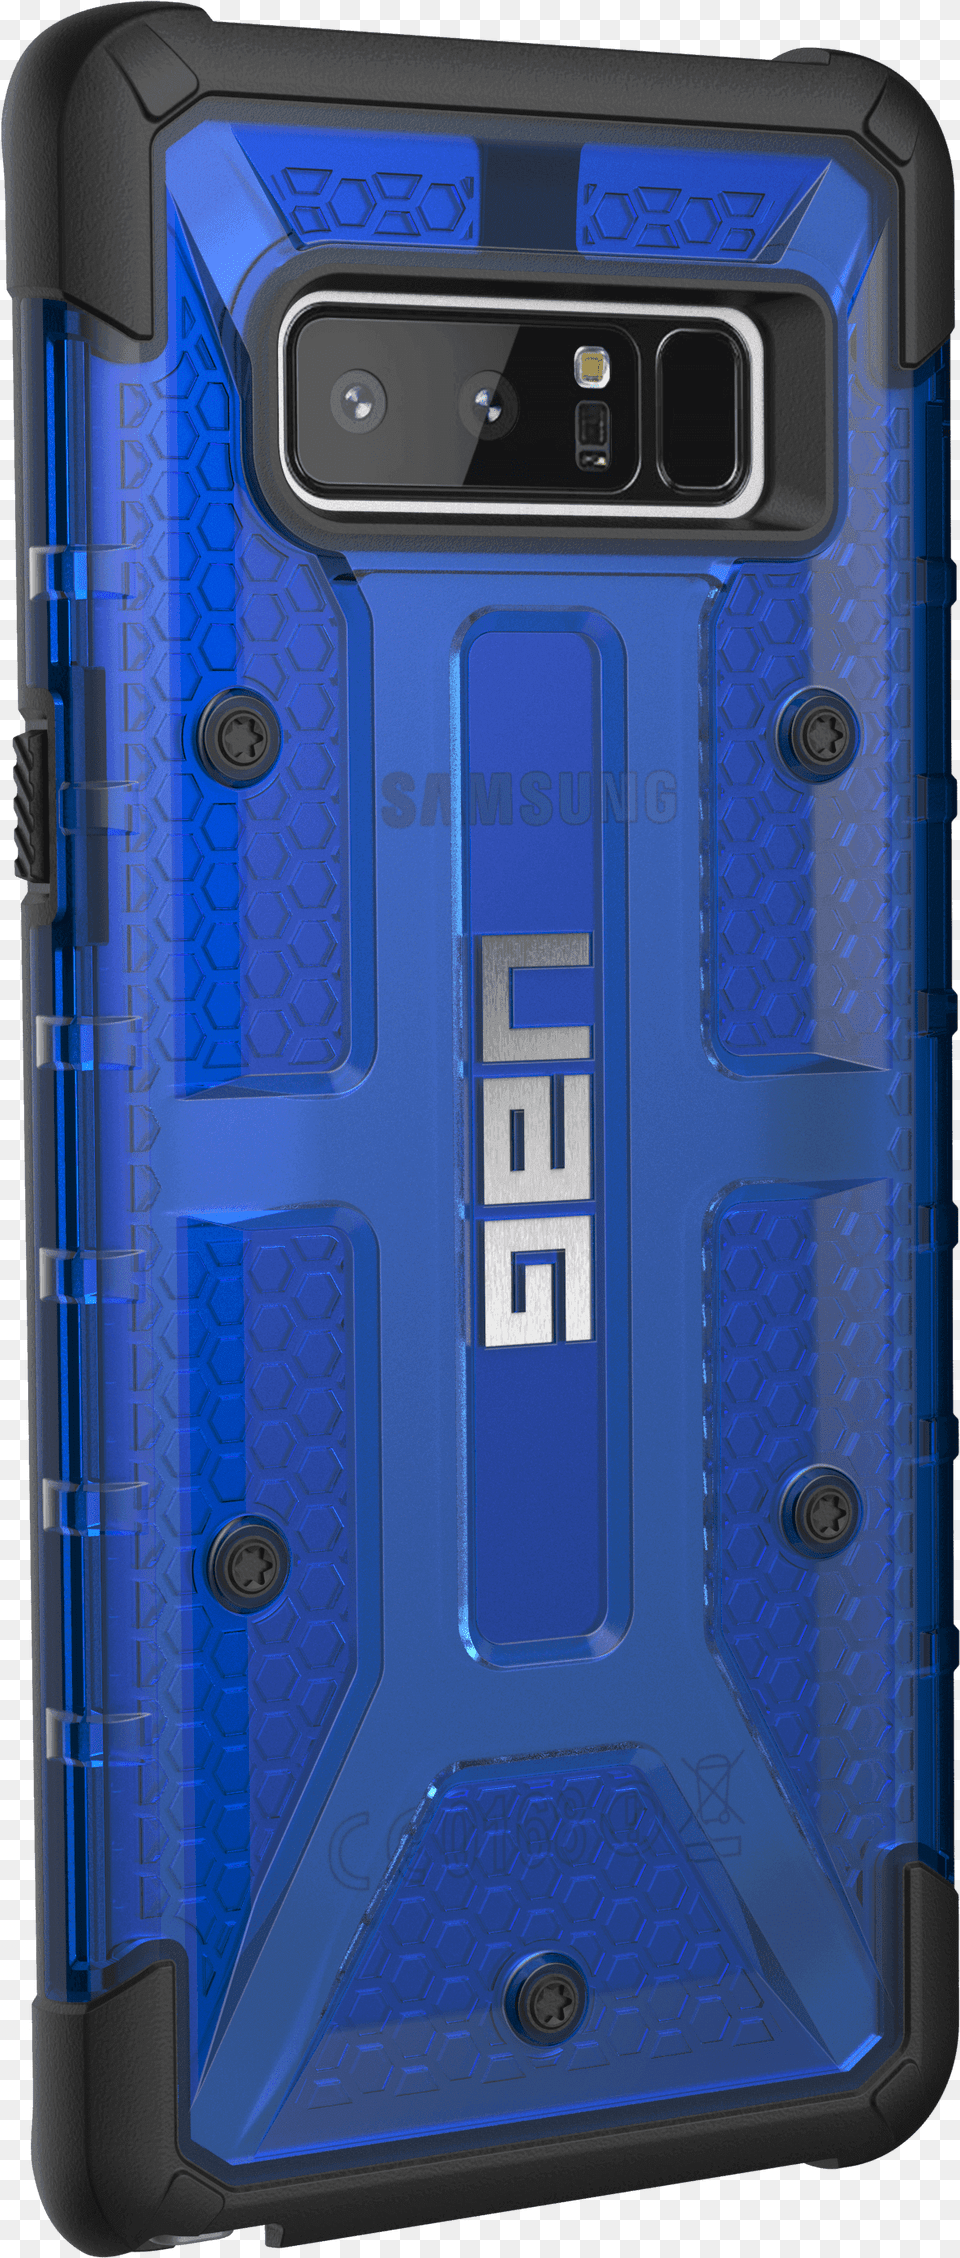 Note 8 Uag Case, Electronics, Mobile Phone, Phone Png Image